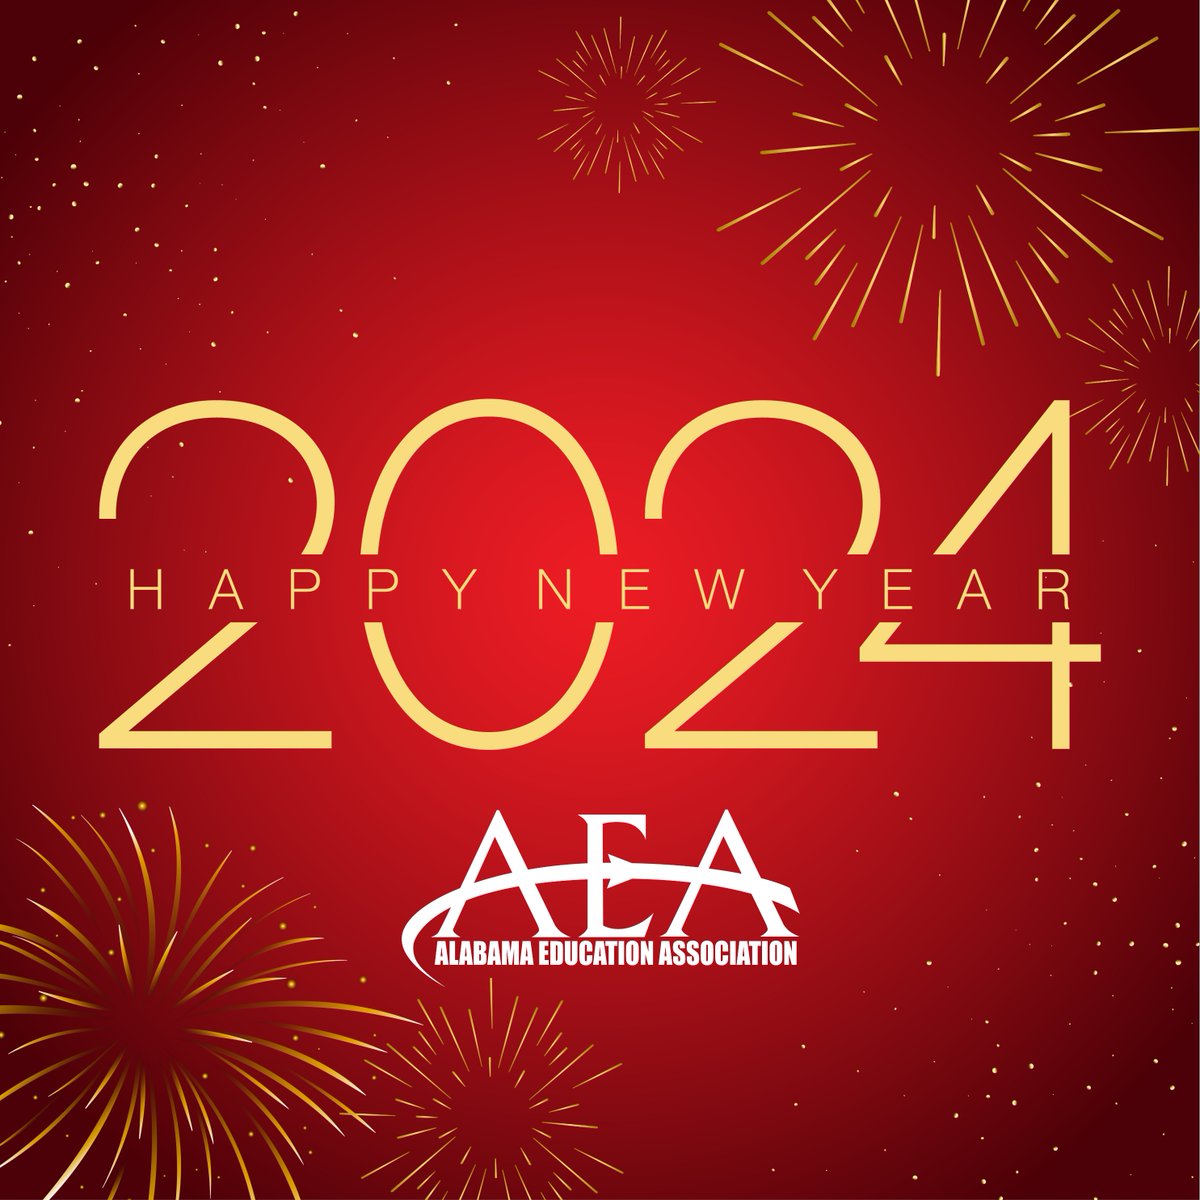 AEA wishes you a #HappyNewYear filled with joy, peace, and prosperity! We are so grateful for the hard work and dedication all educators brought to 2023, and we can't wait to see what we accomplish together in 2024! 🎉 #myAEA